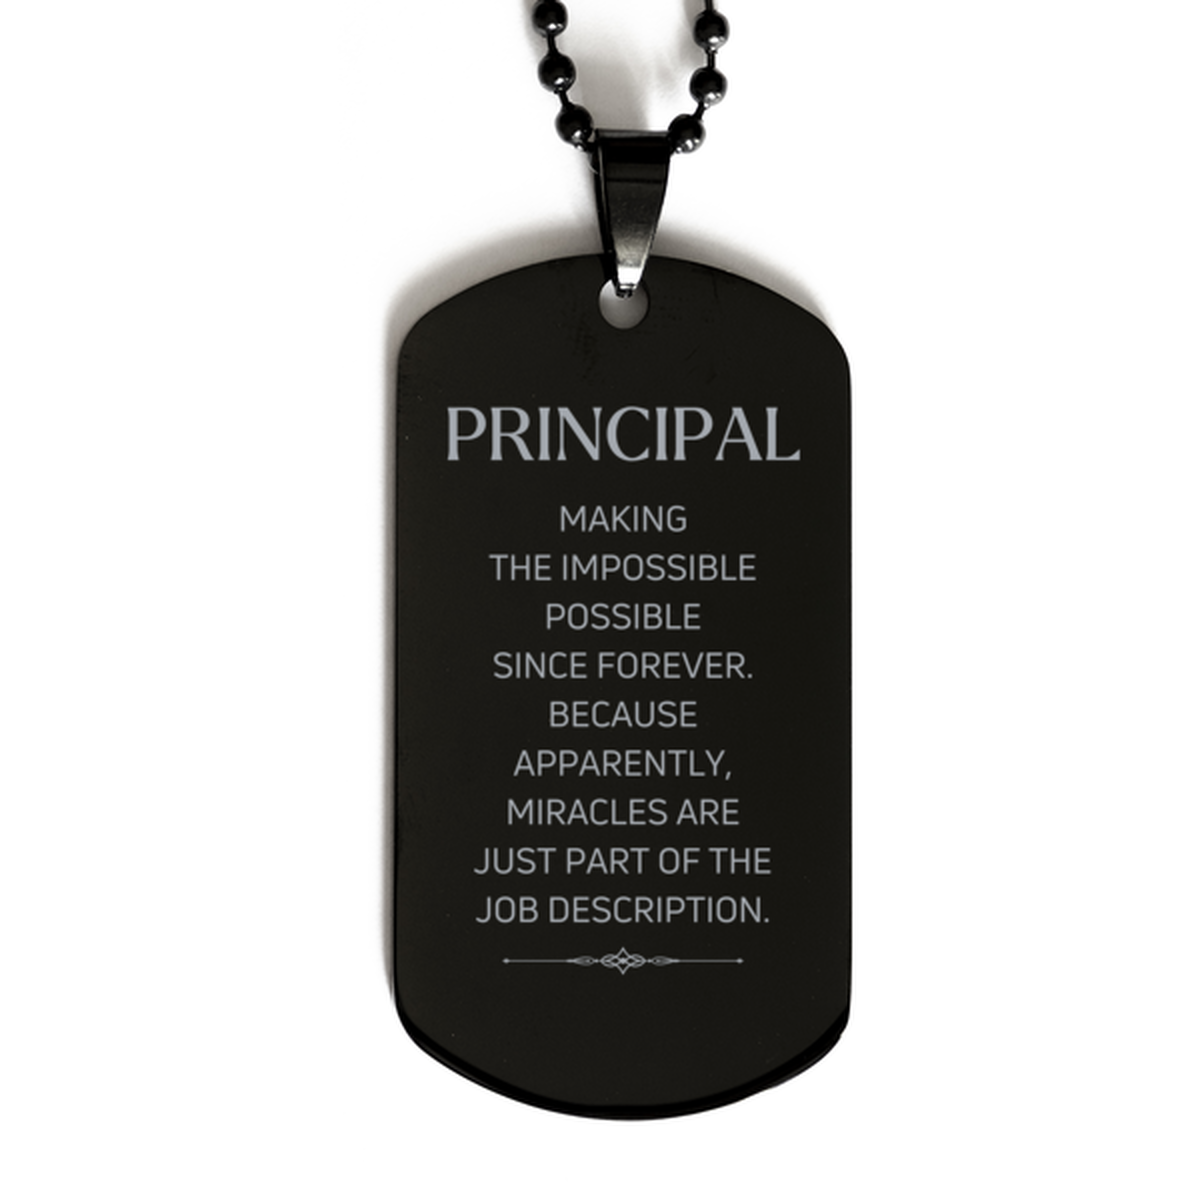 Funny Principal Gifts, Miracles are just part of the job description, Inspirational Birthday Black Dog Tag For Principal, Men, Women, Coworkers, Friends, Boss